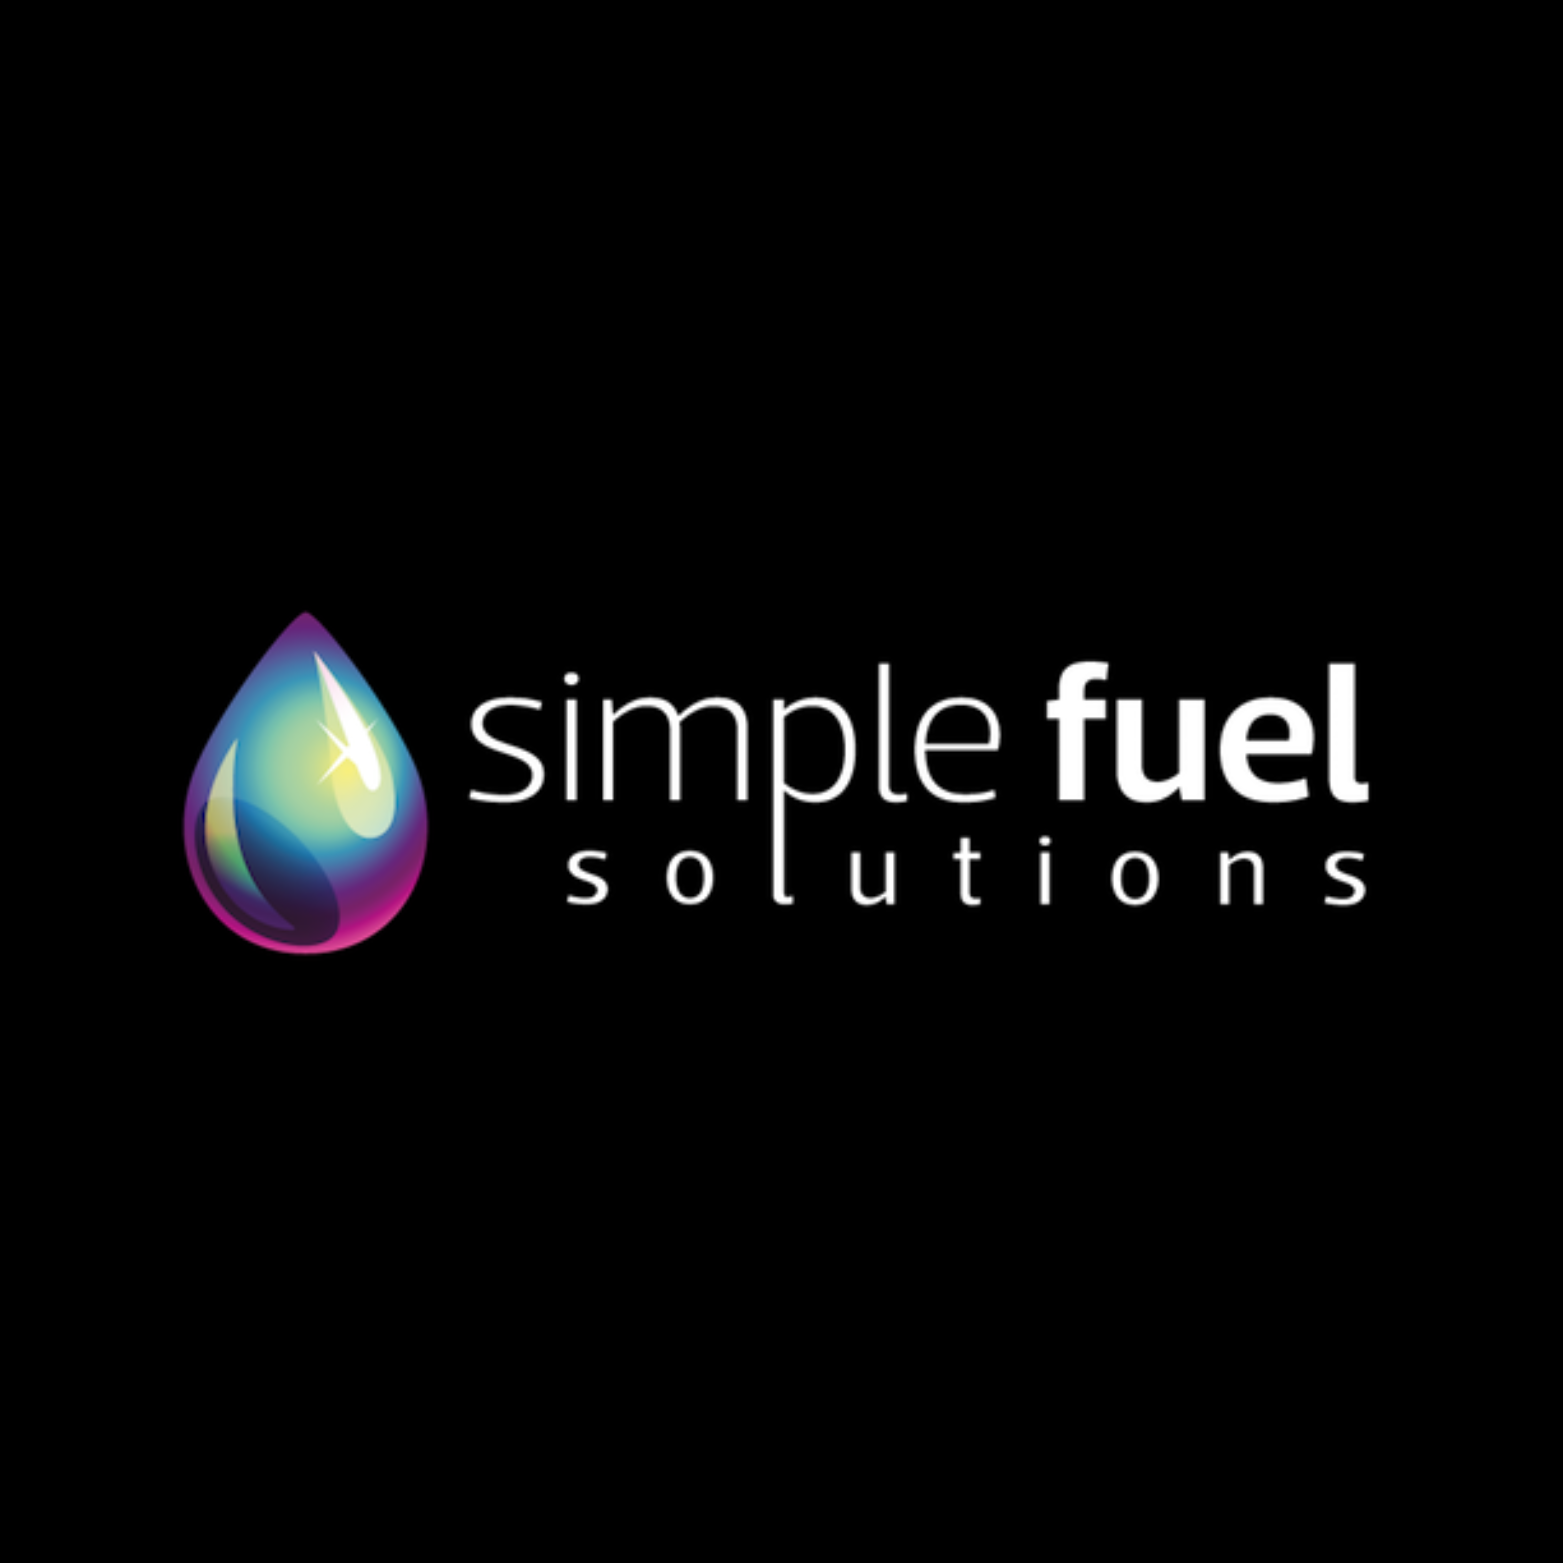 Simple Fuel Solutions Limited